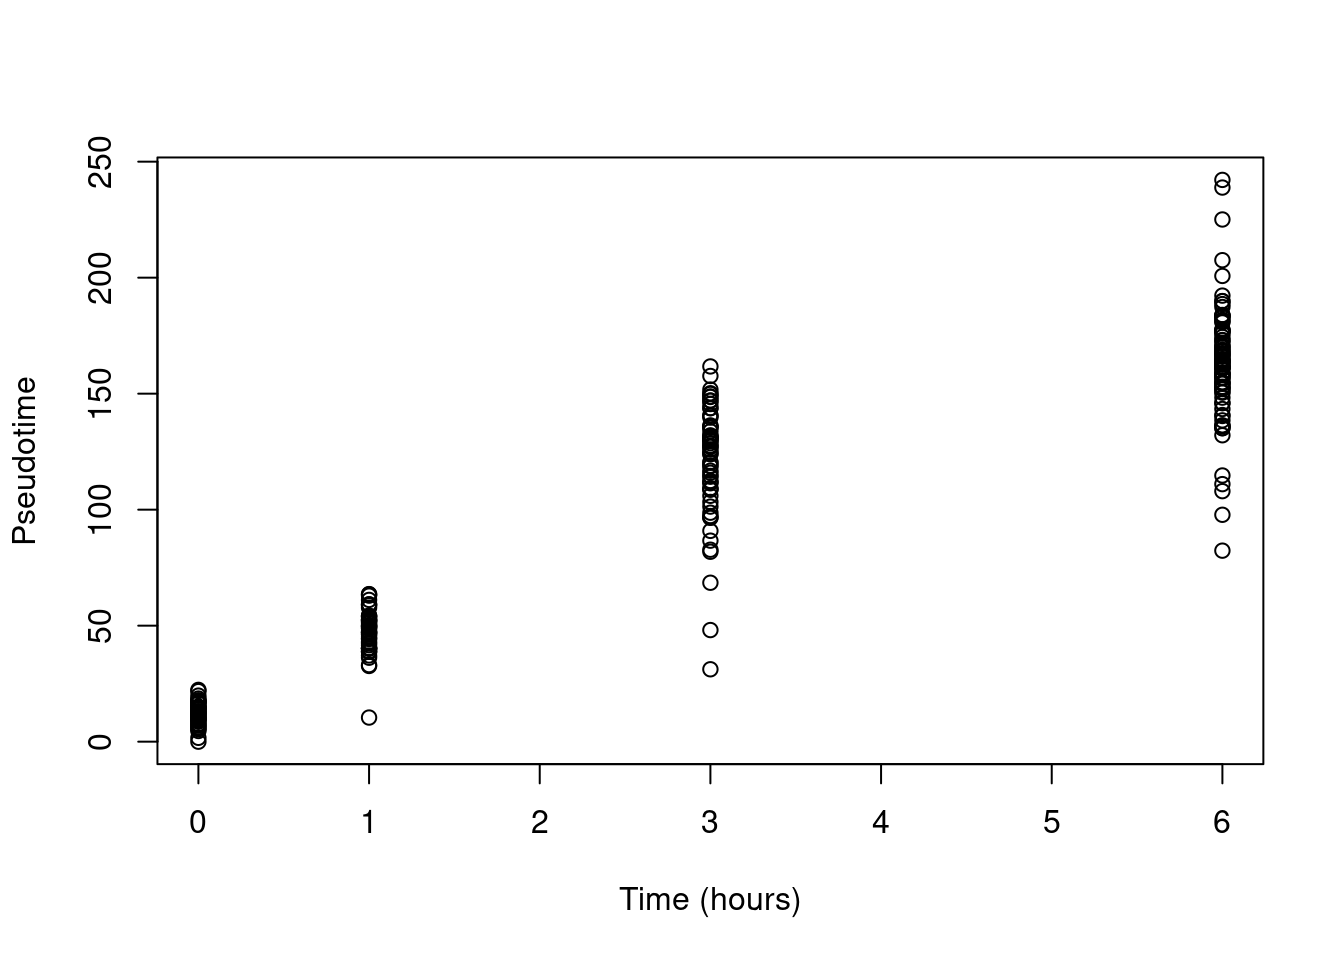 Pseudotime as a function of real time in the Richard T cell dataset.